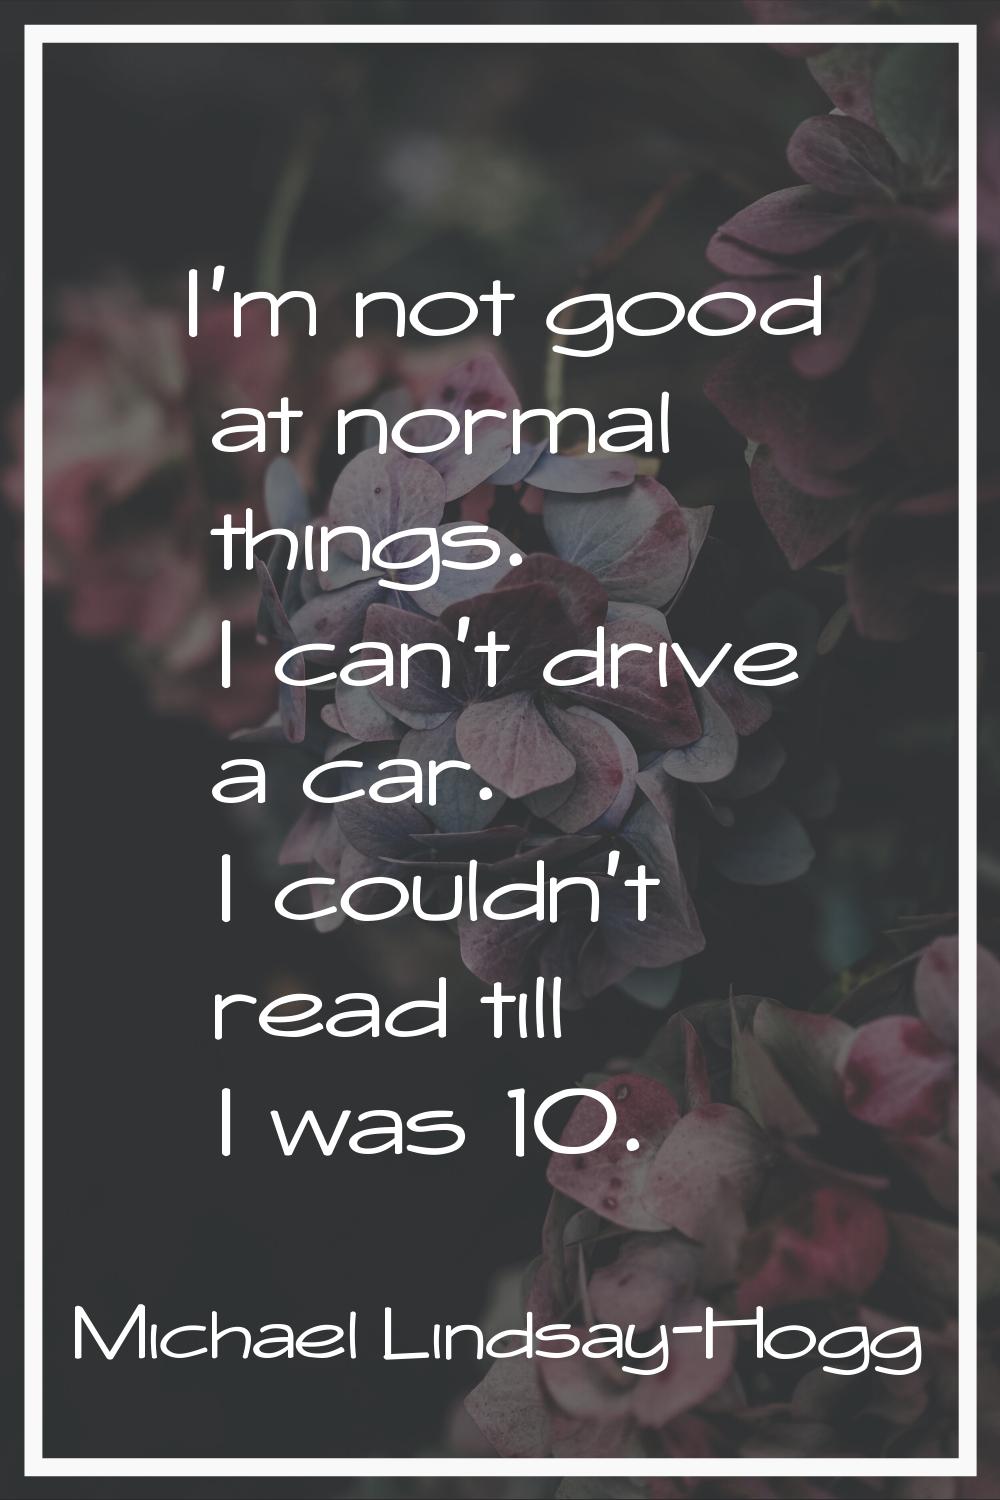 I'm not good at normal things. I can't drive a car. I couldn't read till I was 10.